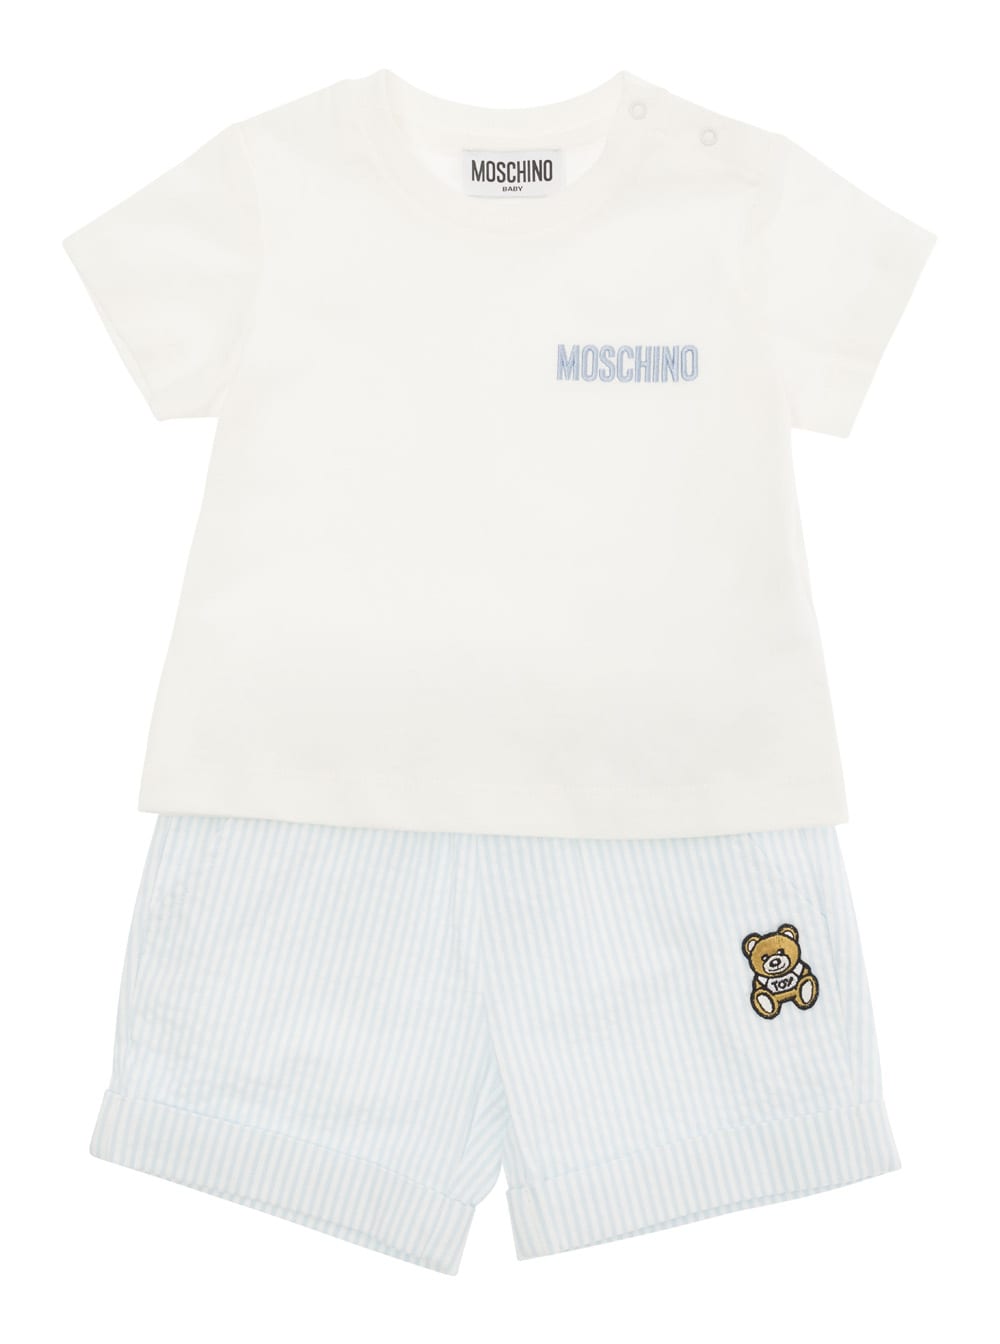 Moschino Babies' T-shirt + Shorts Set Addition In White